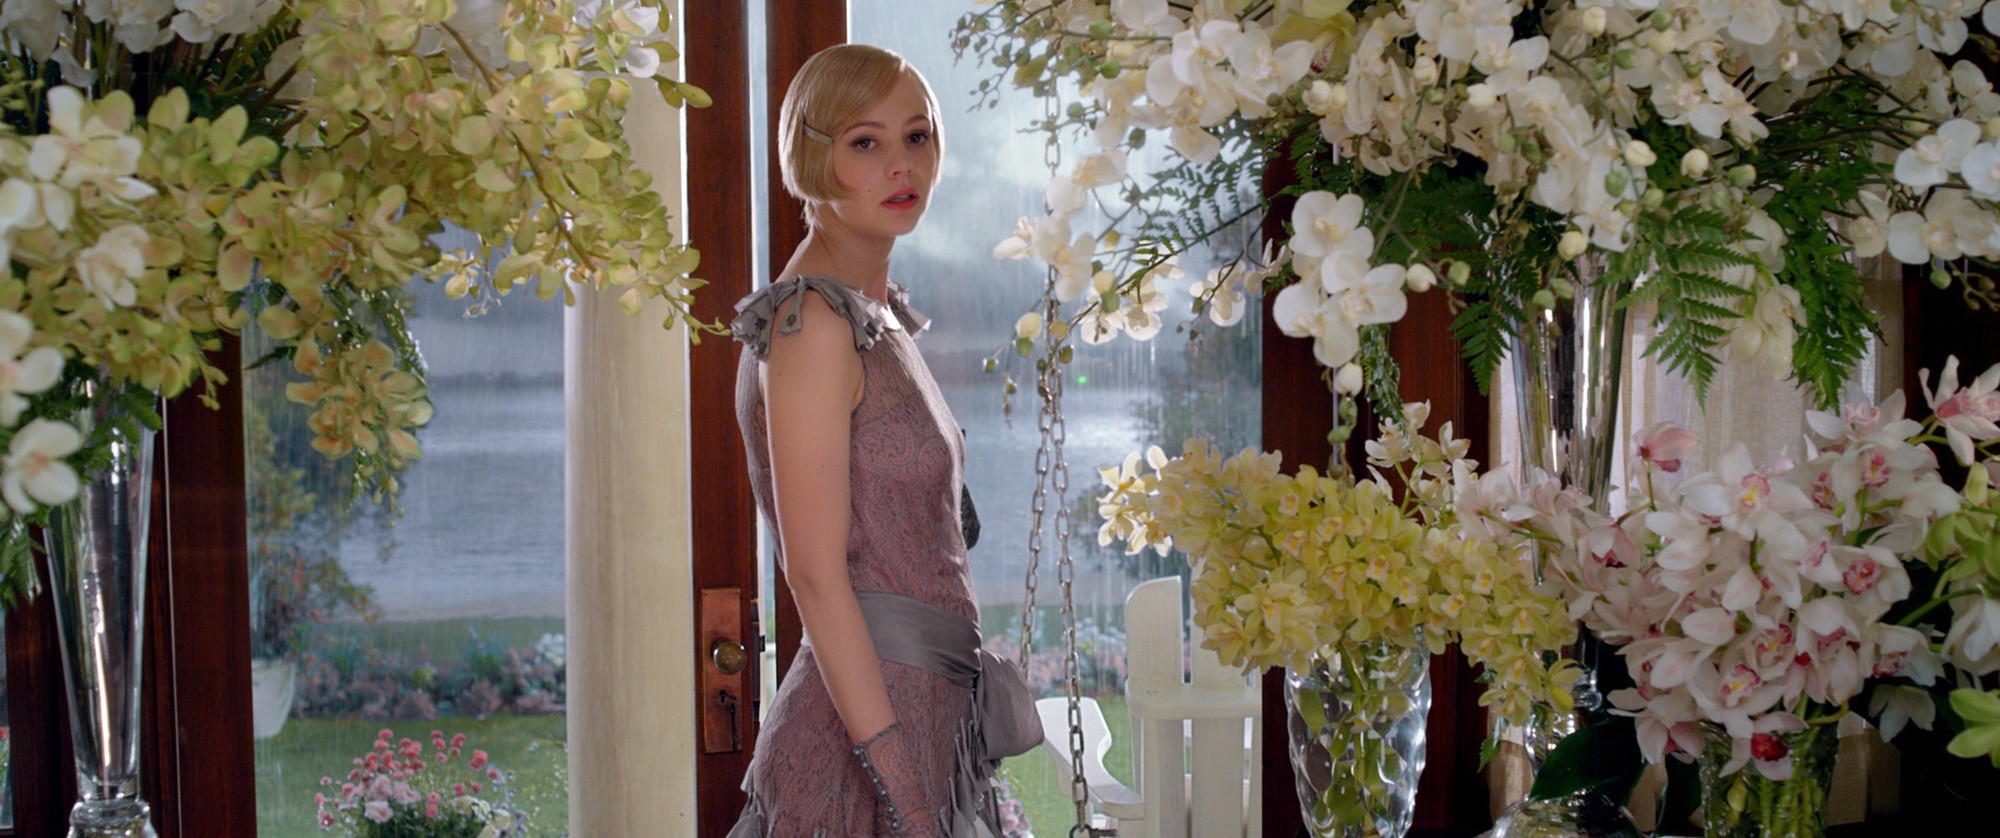 Carey Mulligan stars as Daisy Buchanan in Warner Bros. Pictures' The Great Gatsby (2013)